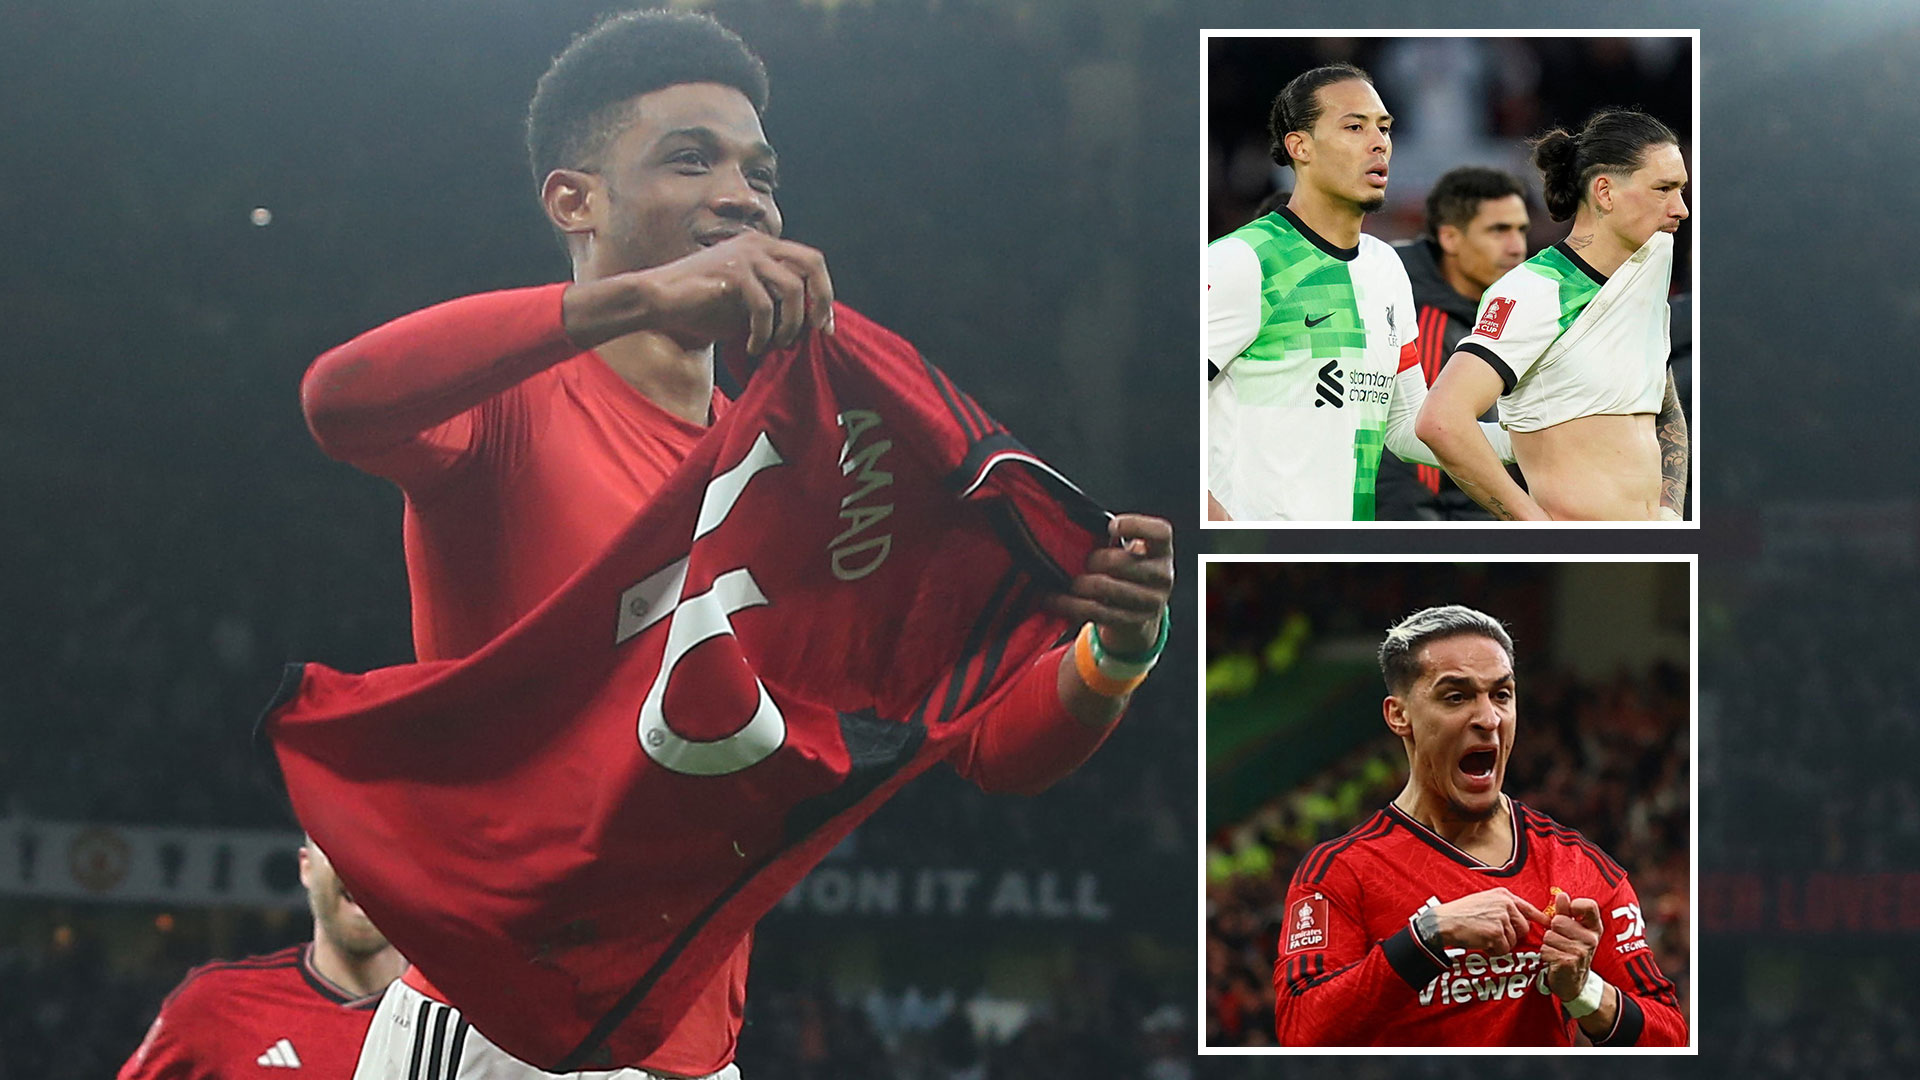 Man Utd 4 Liverpool 3: Red Devils’ forgotten man Amad Diallo sends Ten Hag’s side to Wembley with last gasp winner [Video]